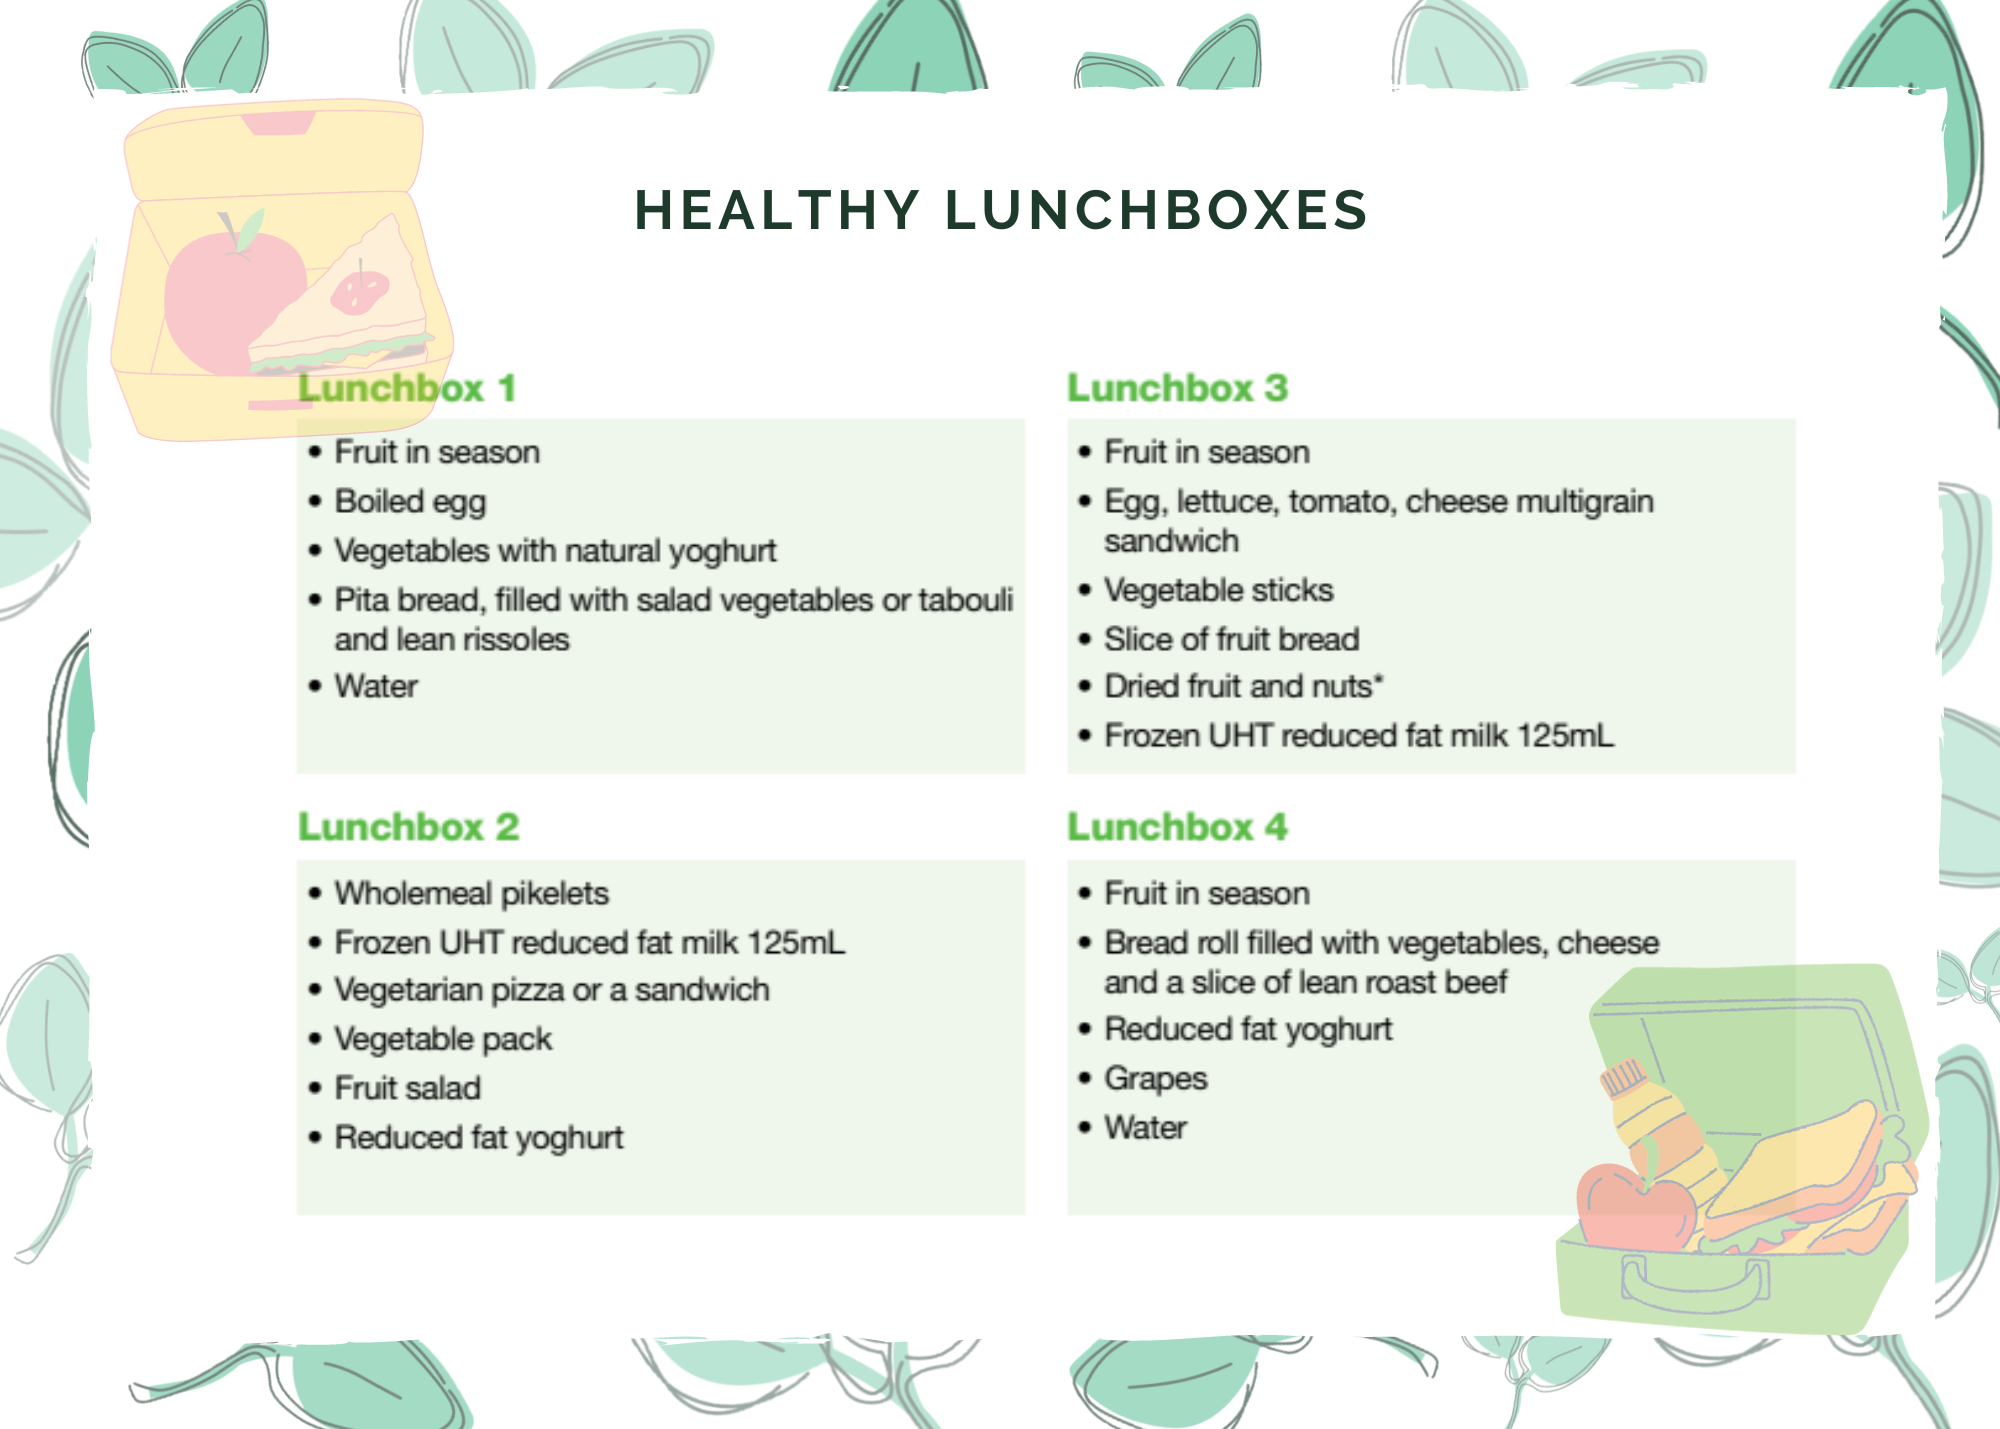 Please click here to view Healthy food flier